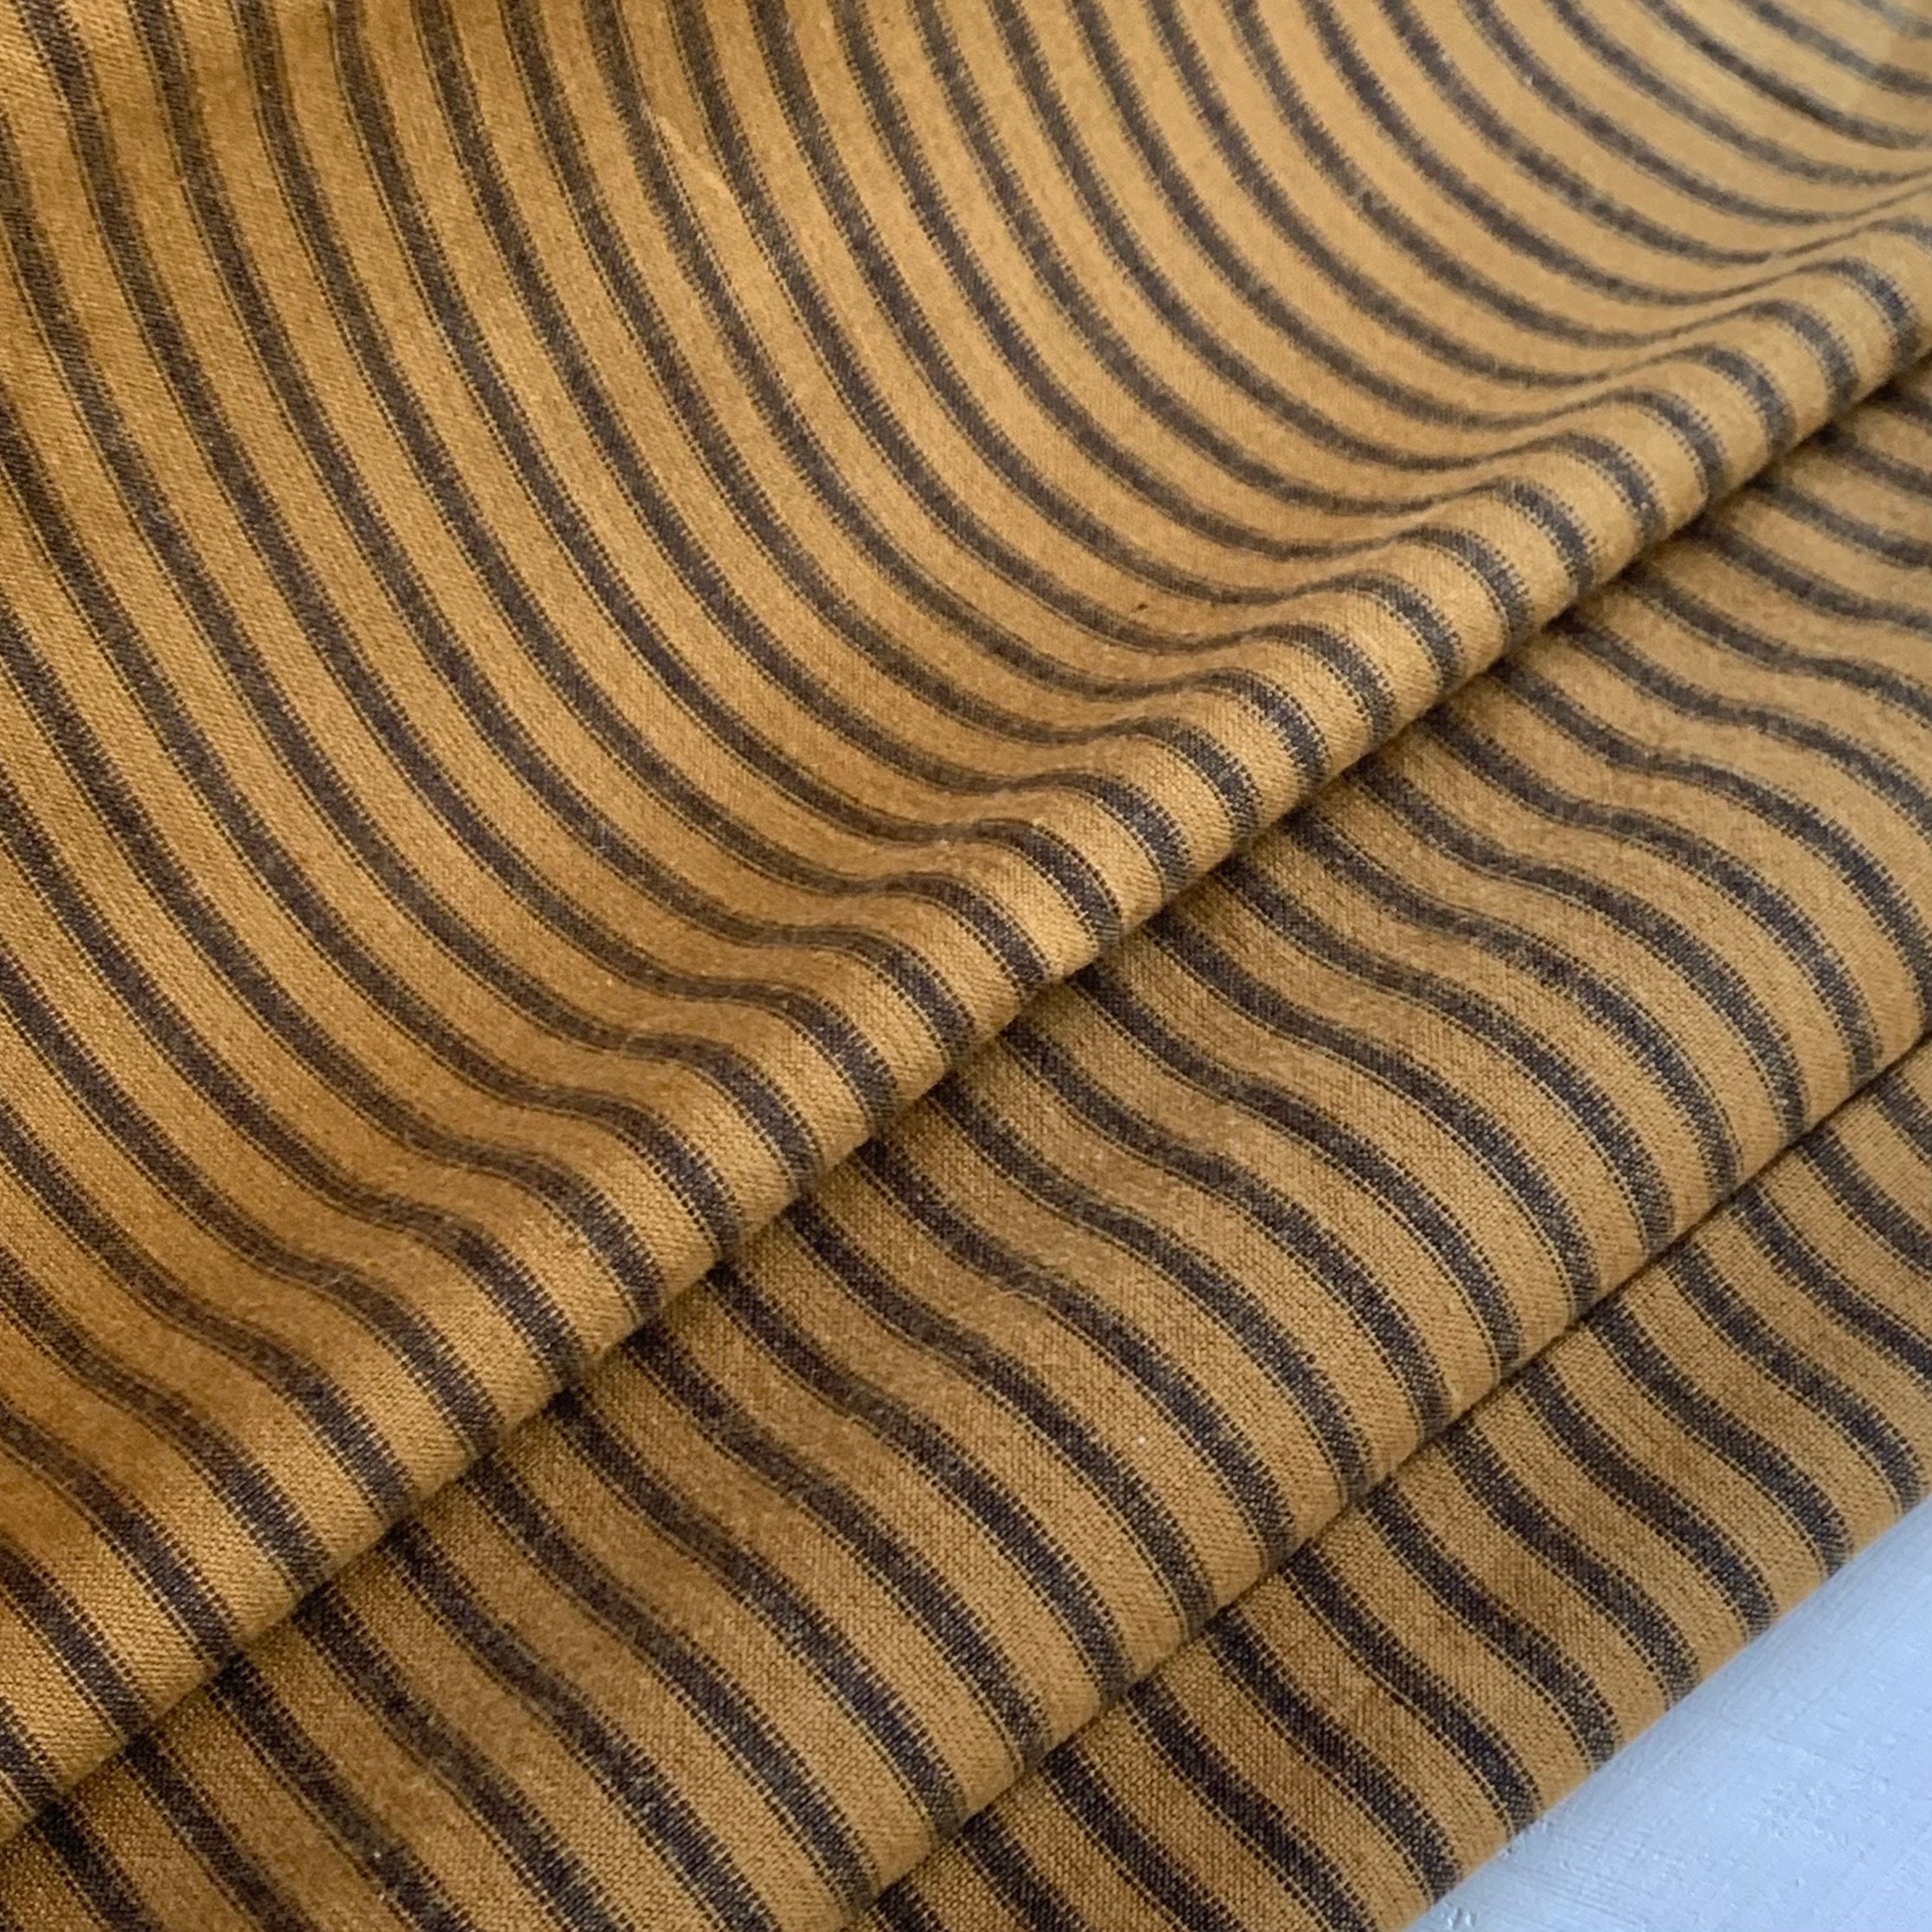 Homespun Striped Mustard and Black Fabric Woven Doubled Sided